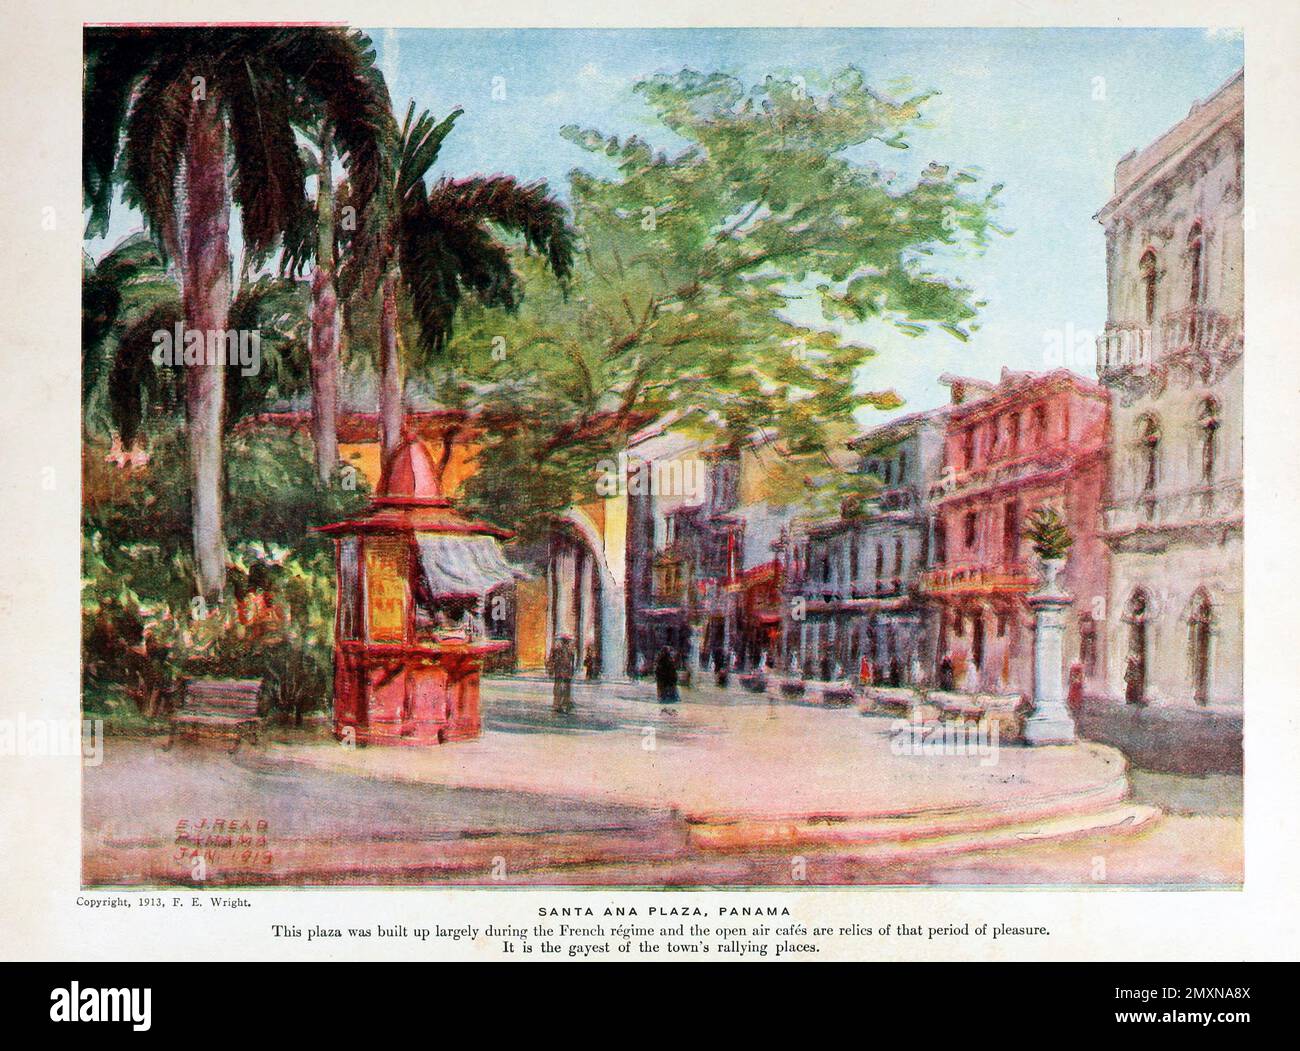 Santa Ana Plaza Panama City from the book Panama and the Canal in picture and prose : a complete story of Panama, as well as the history, purpose and promise of its world-famous canal the most gigantic engineering undertaking since the dawn of time by Willis John Abbot,1863-1934 Published in London ; New York by Syndicate Publishing Co. in 1913 Stock Photo